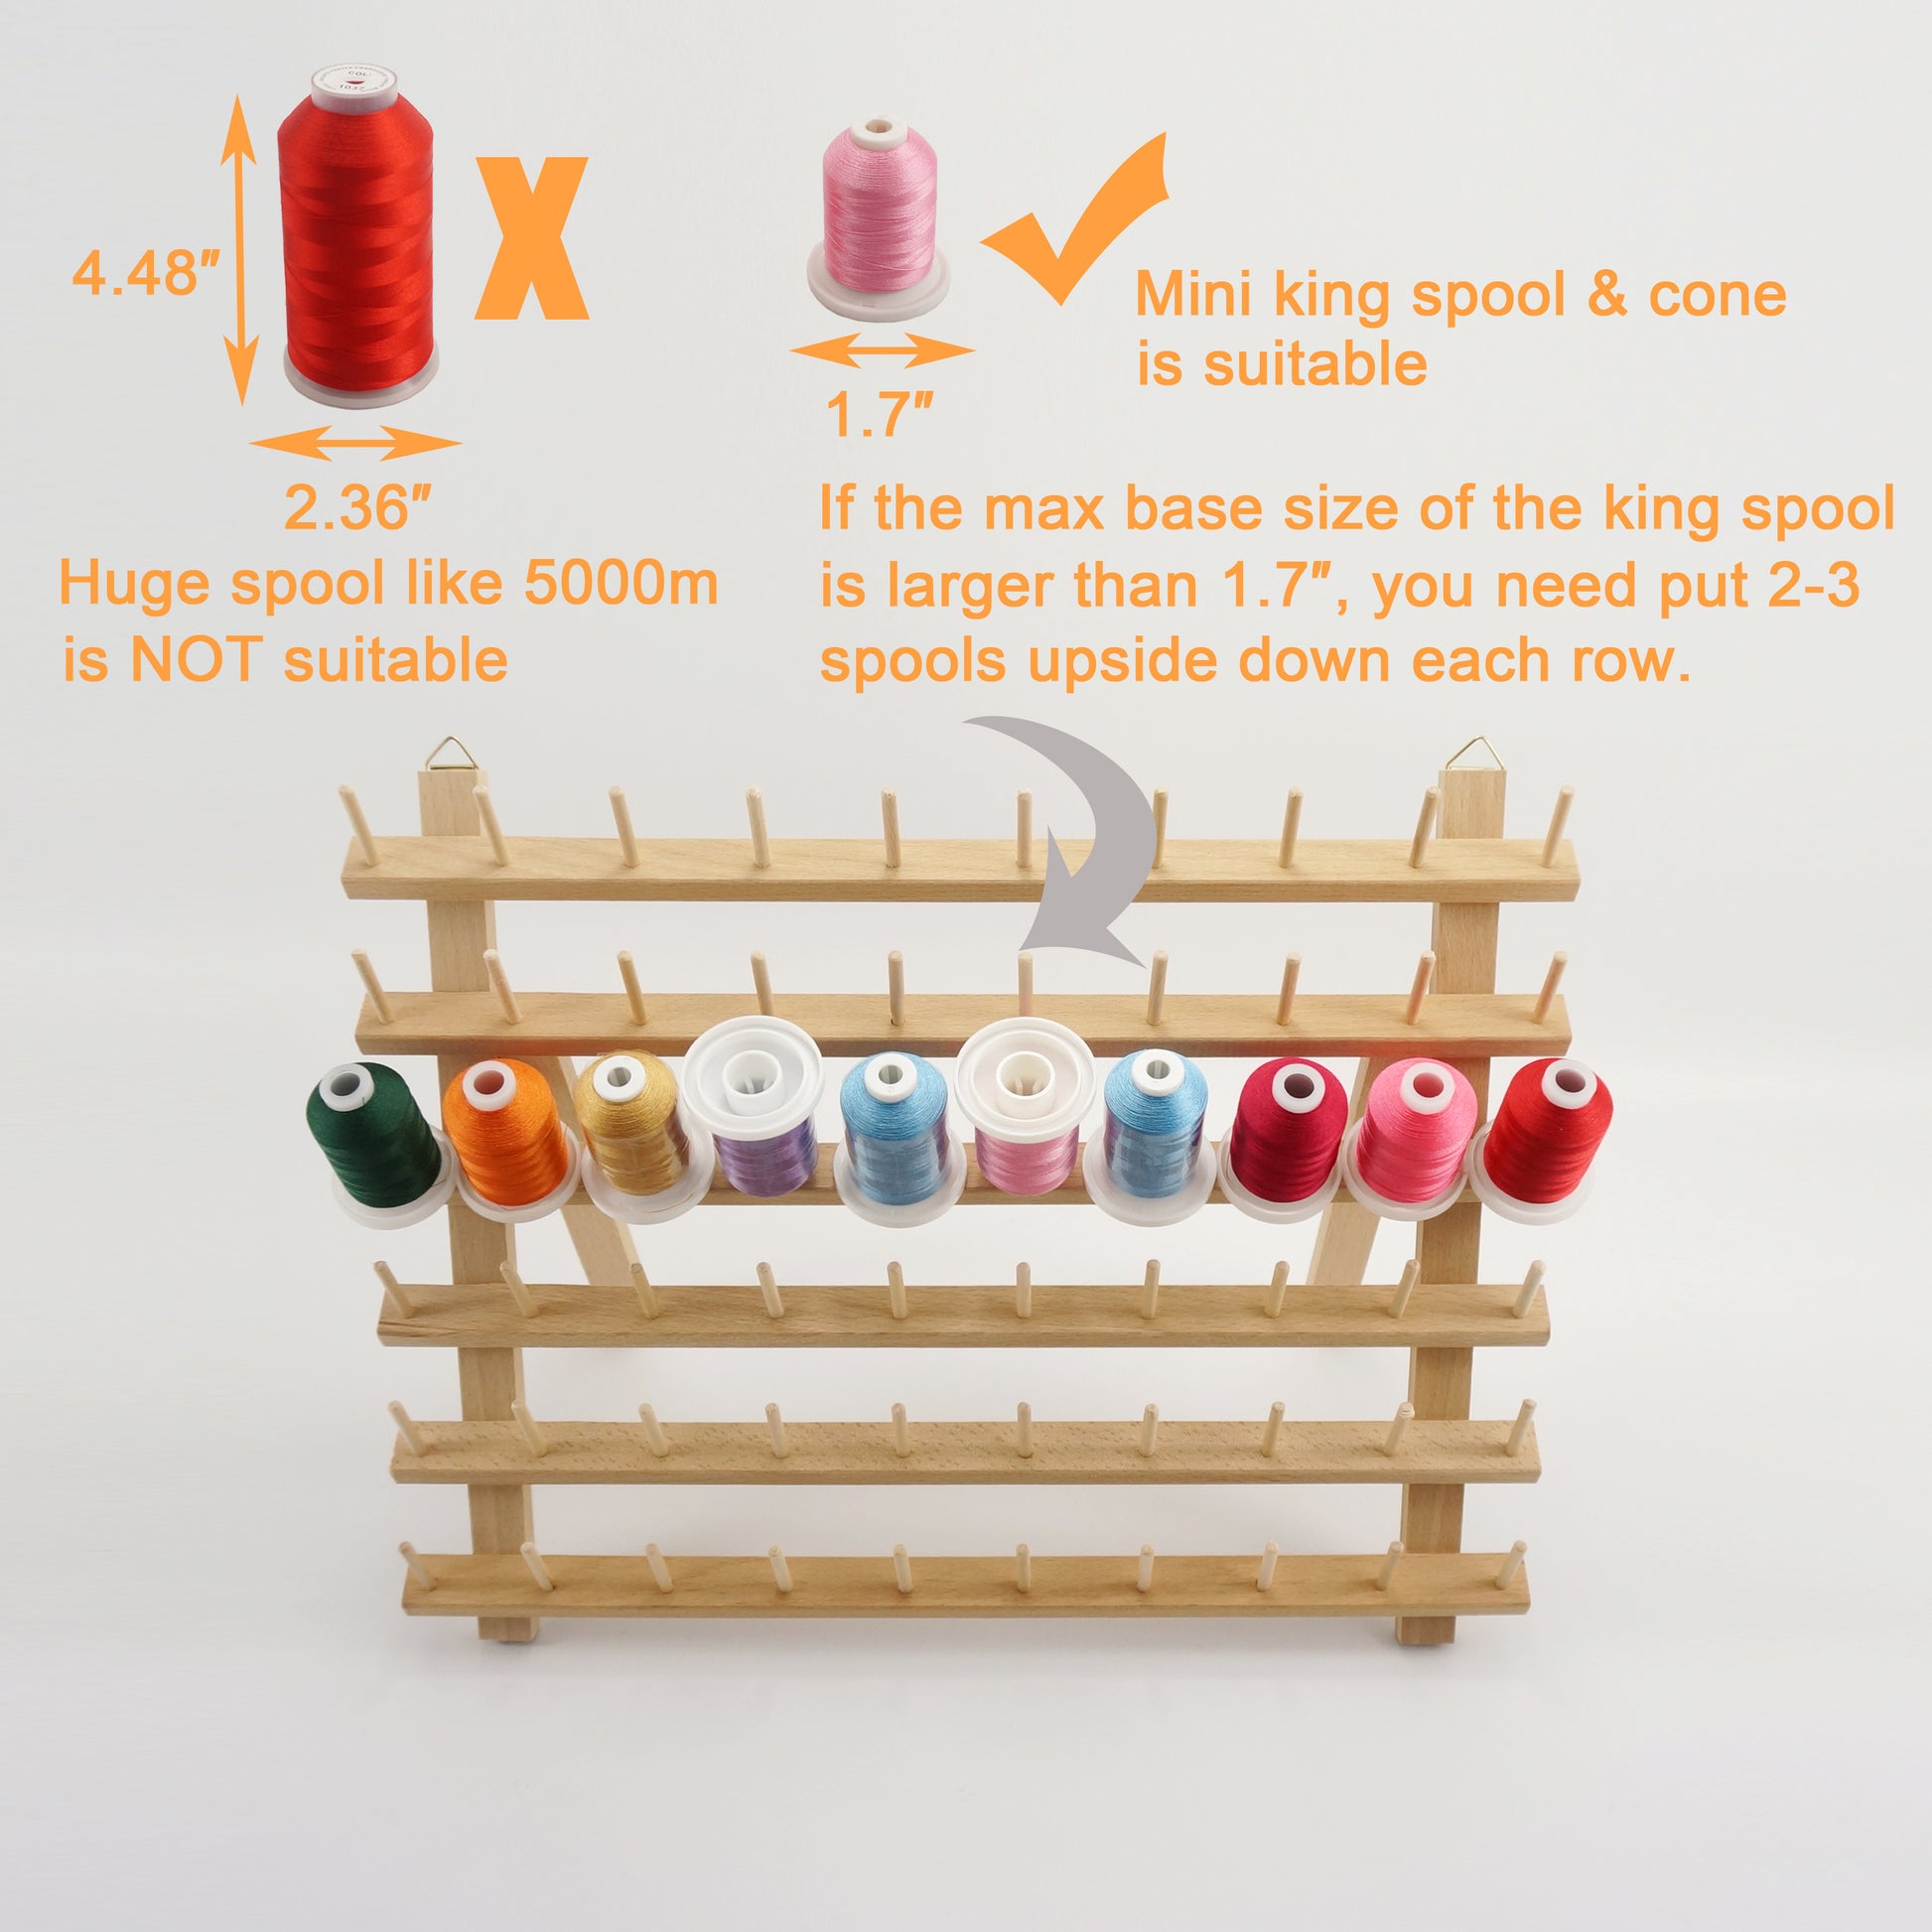 60-Spool Wooden Embroidery Thread Holder with Hanging Hooks